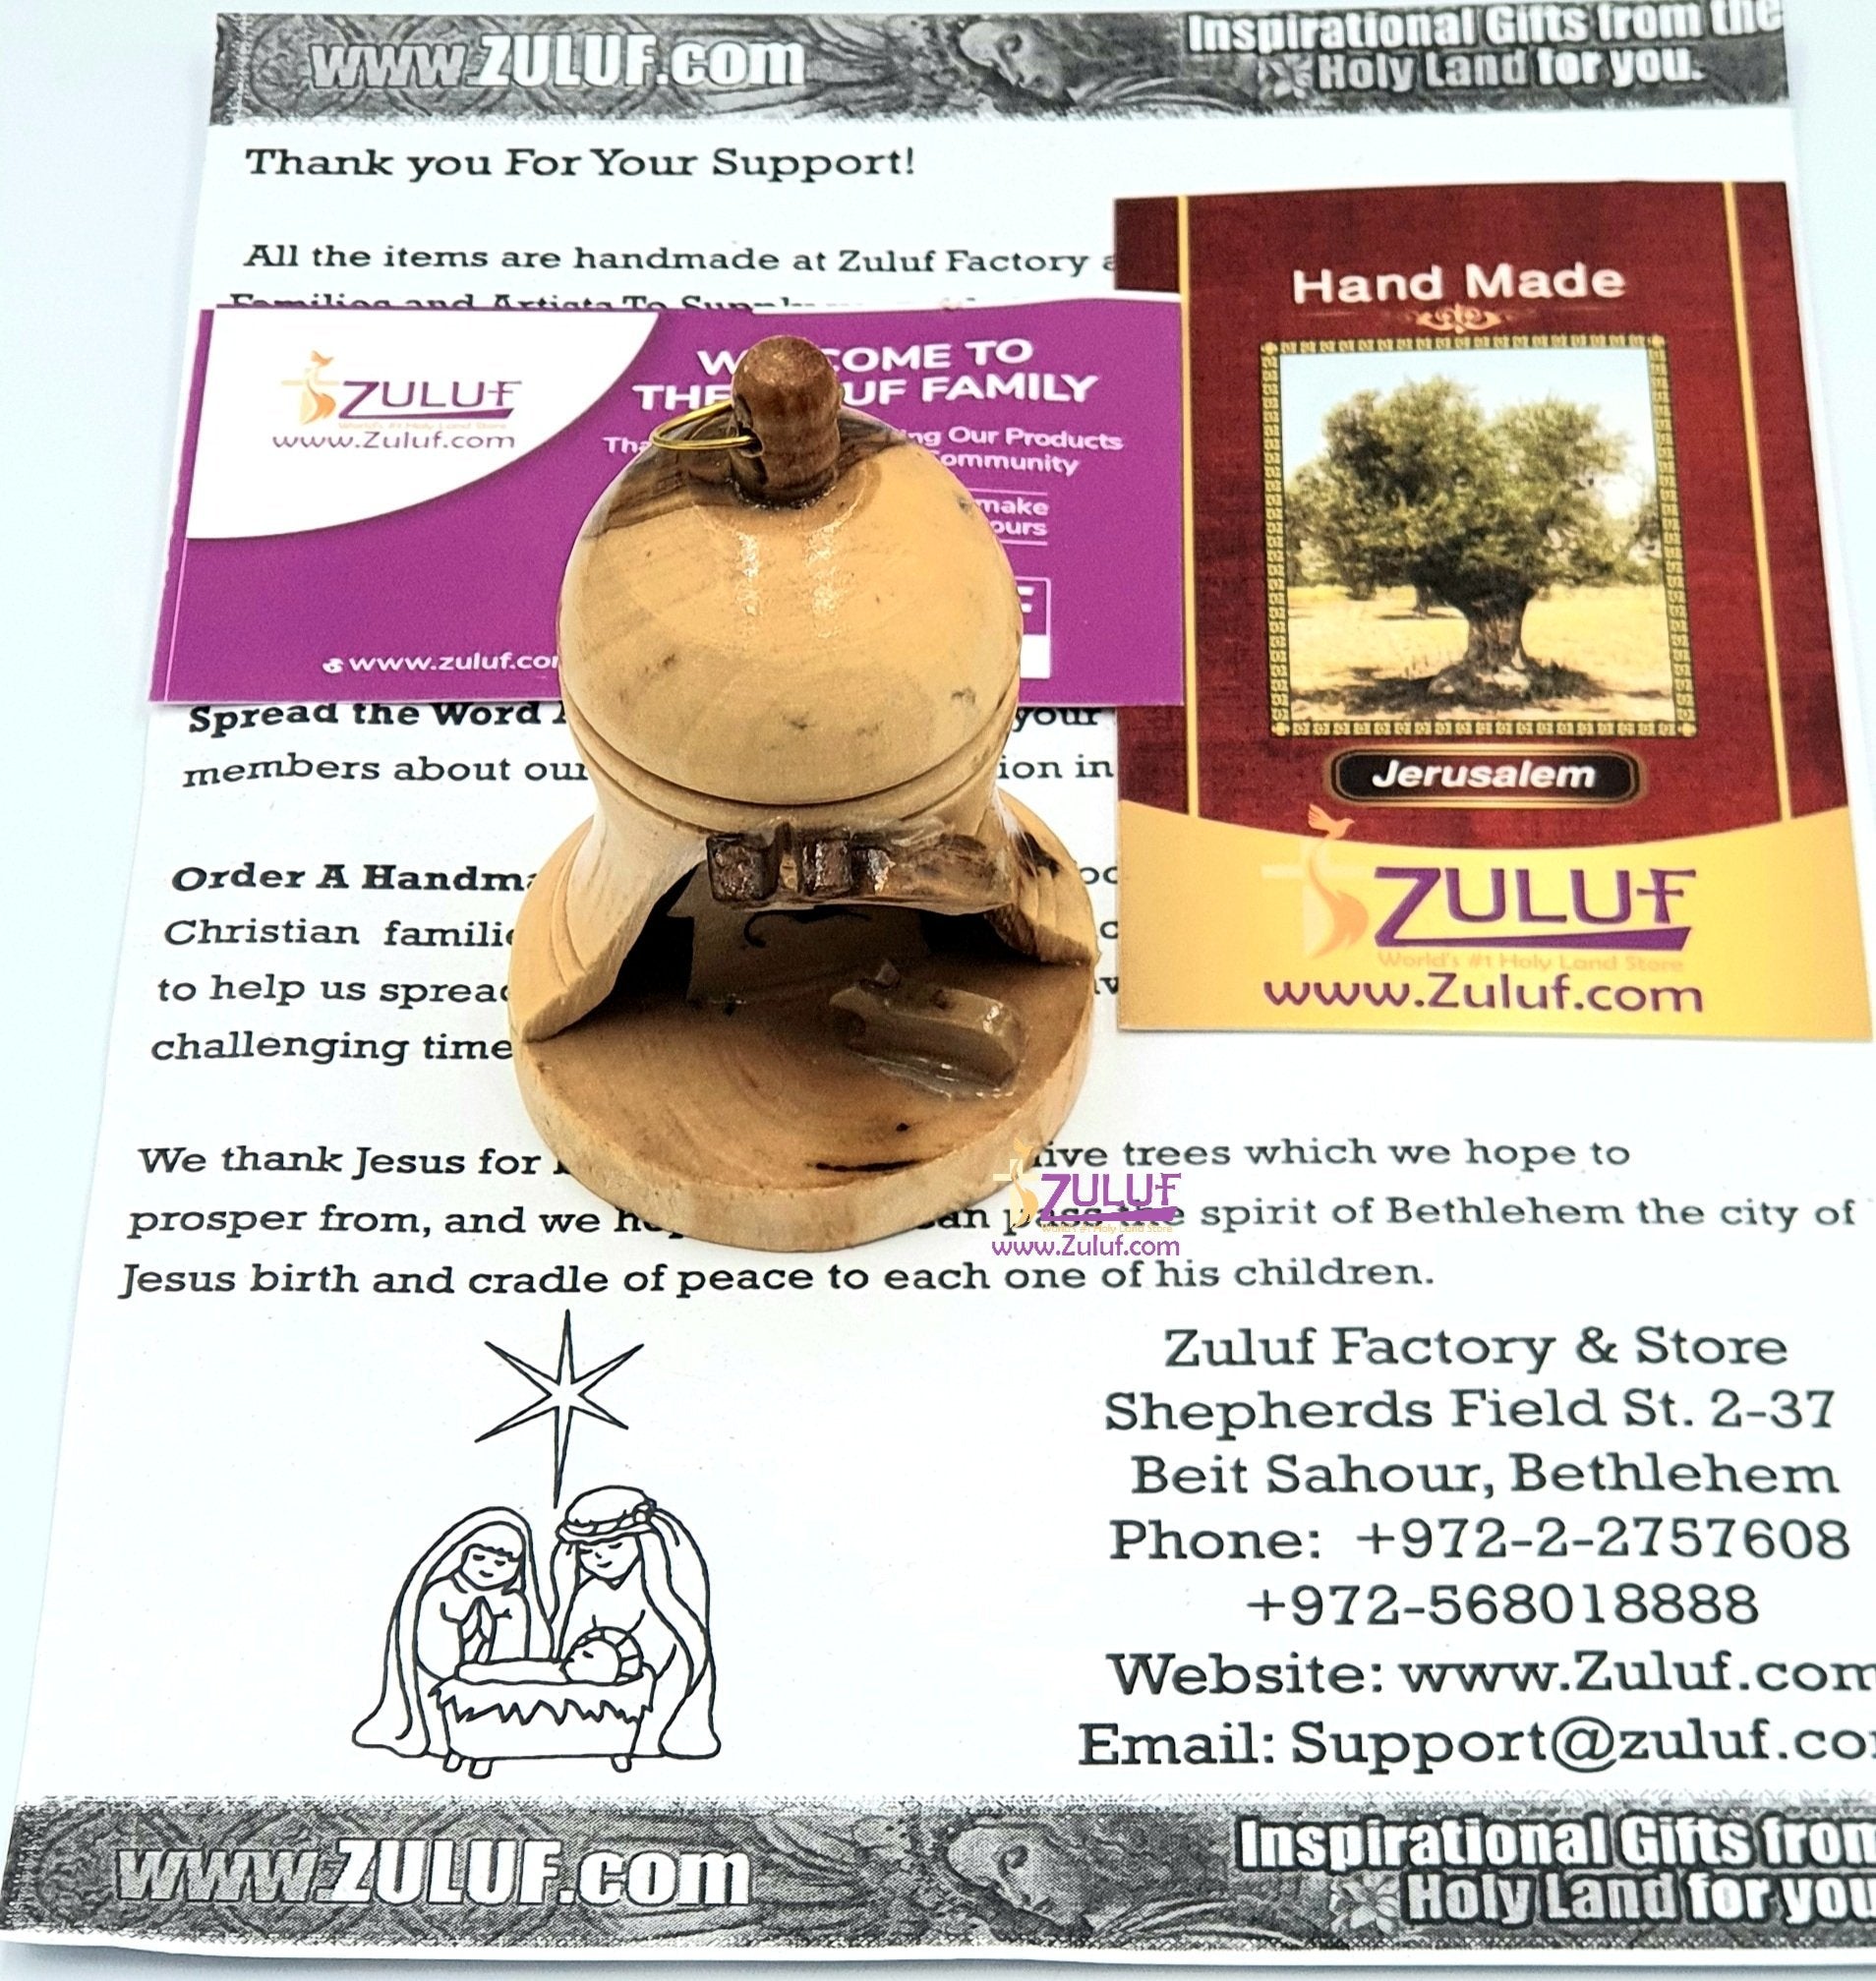 Beautiful Small Nativity Bell Ornament Hand Made From Holy Land Zuluf - (ORN014) - Zuluf